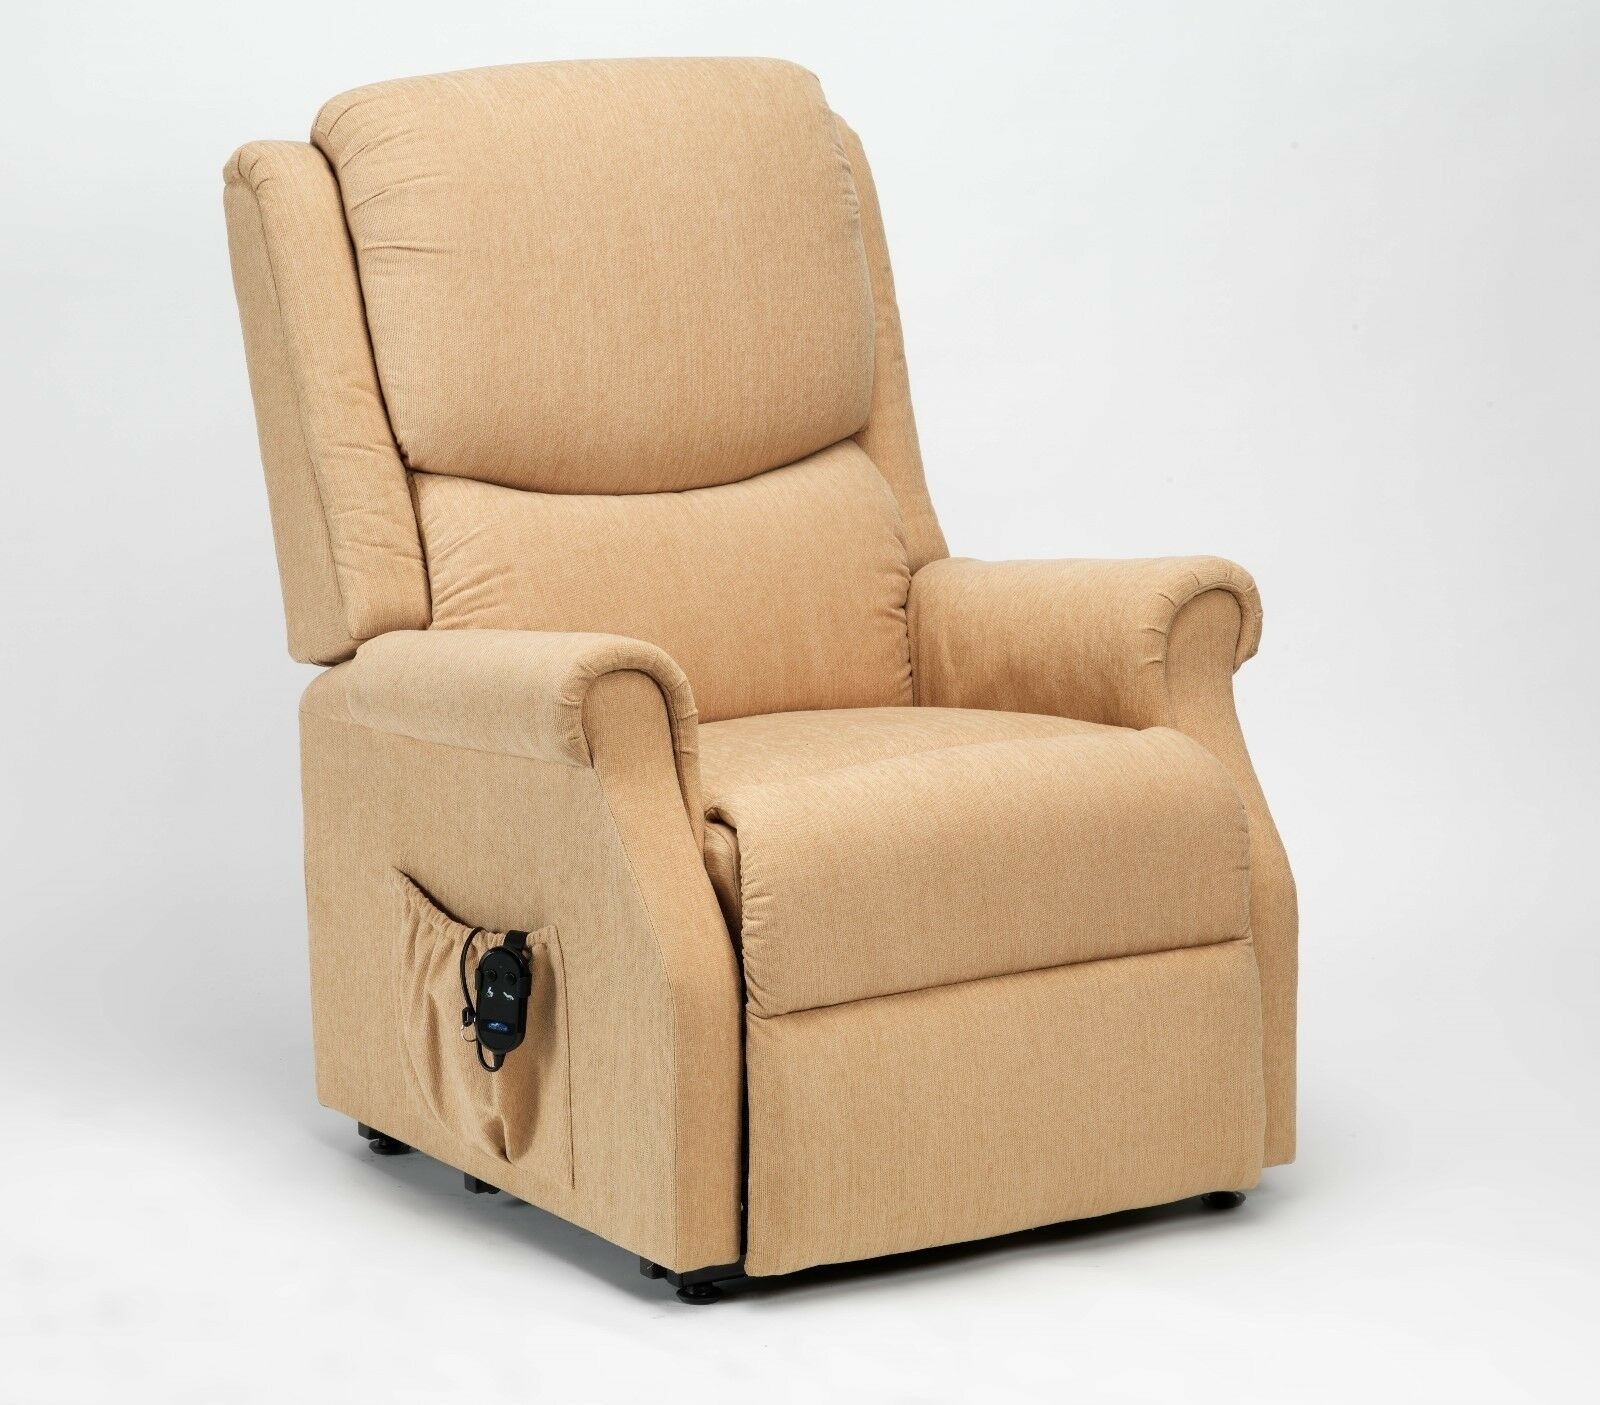 Recliner restwell chair petite size electric riser recliner